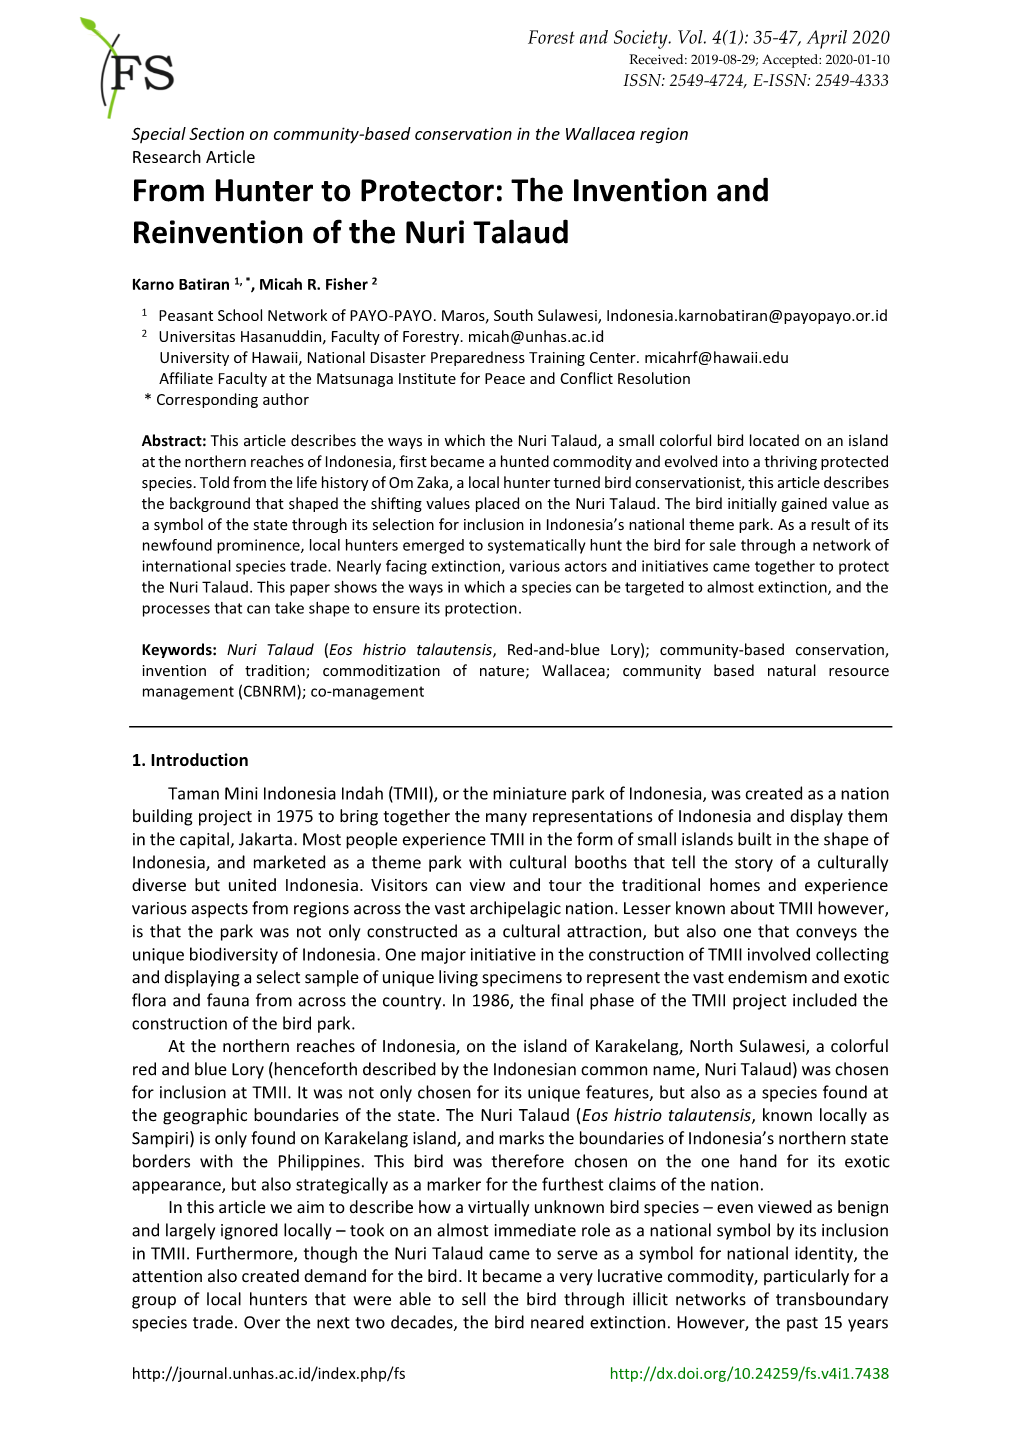 The Invention and Reinvention of the Nuri Talaud